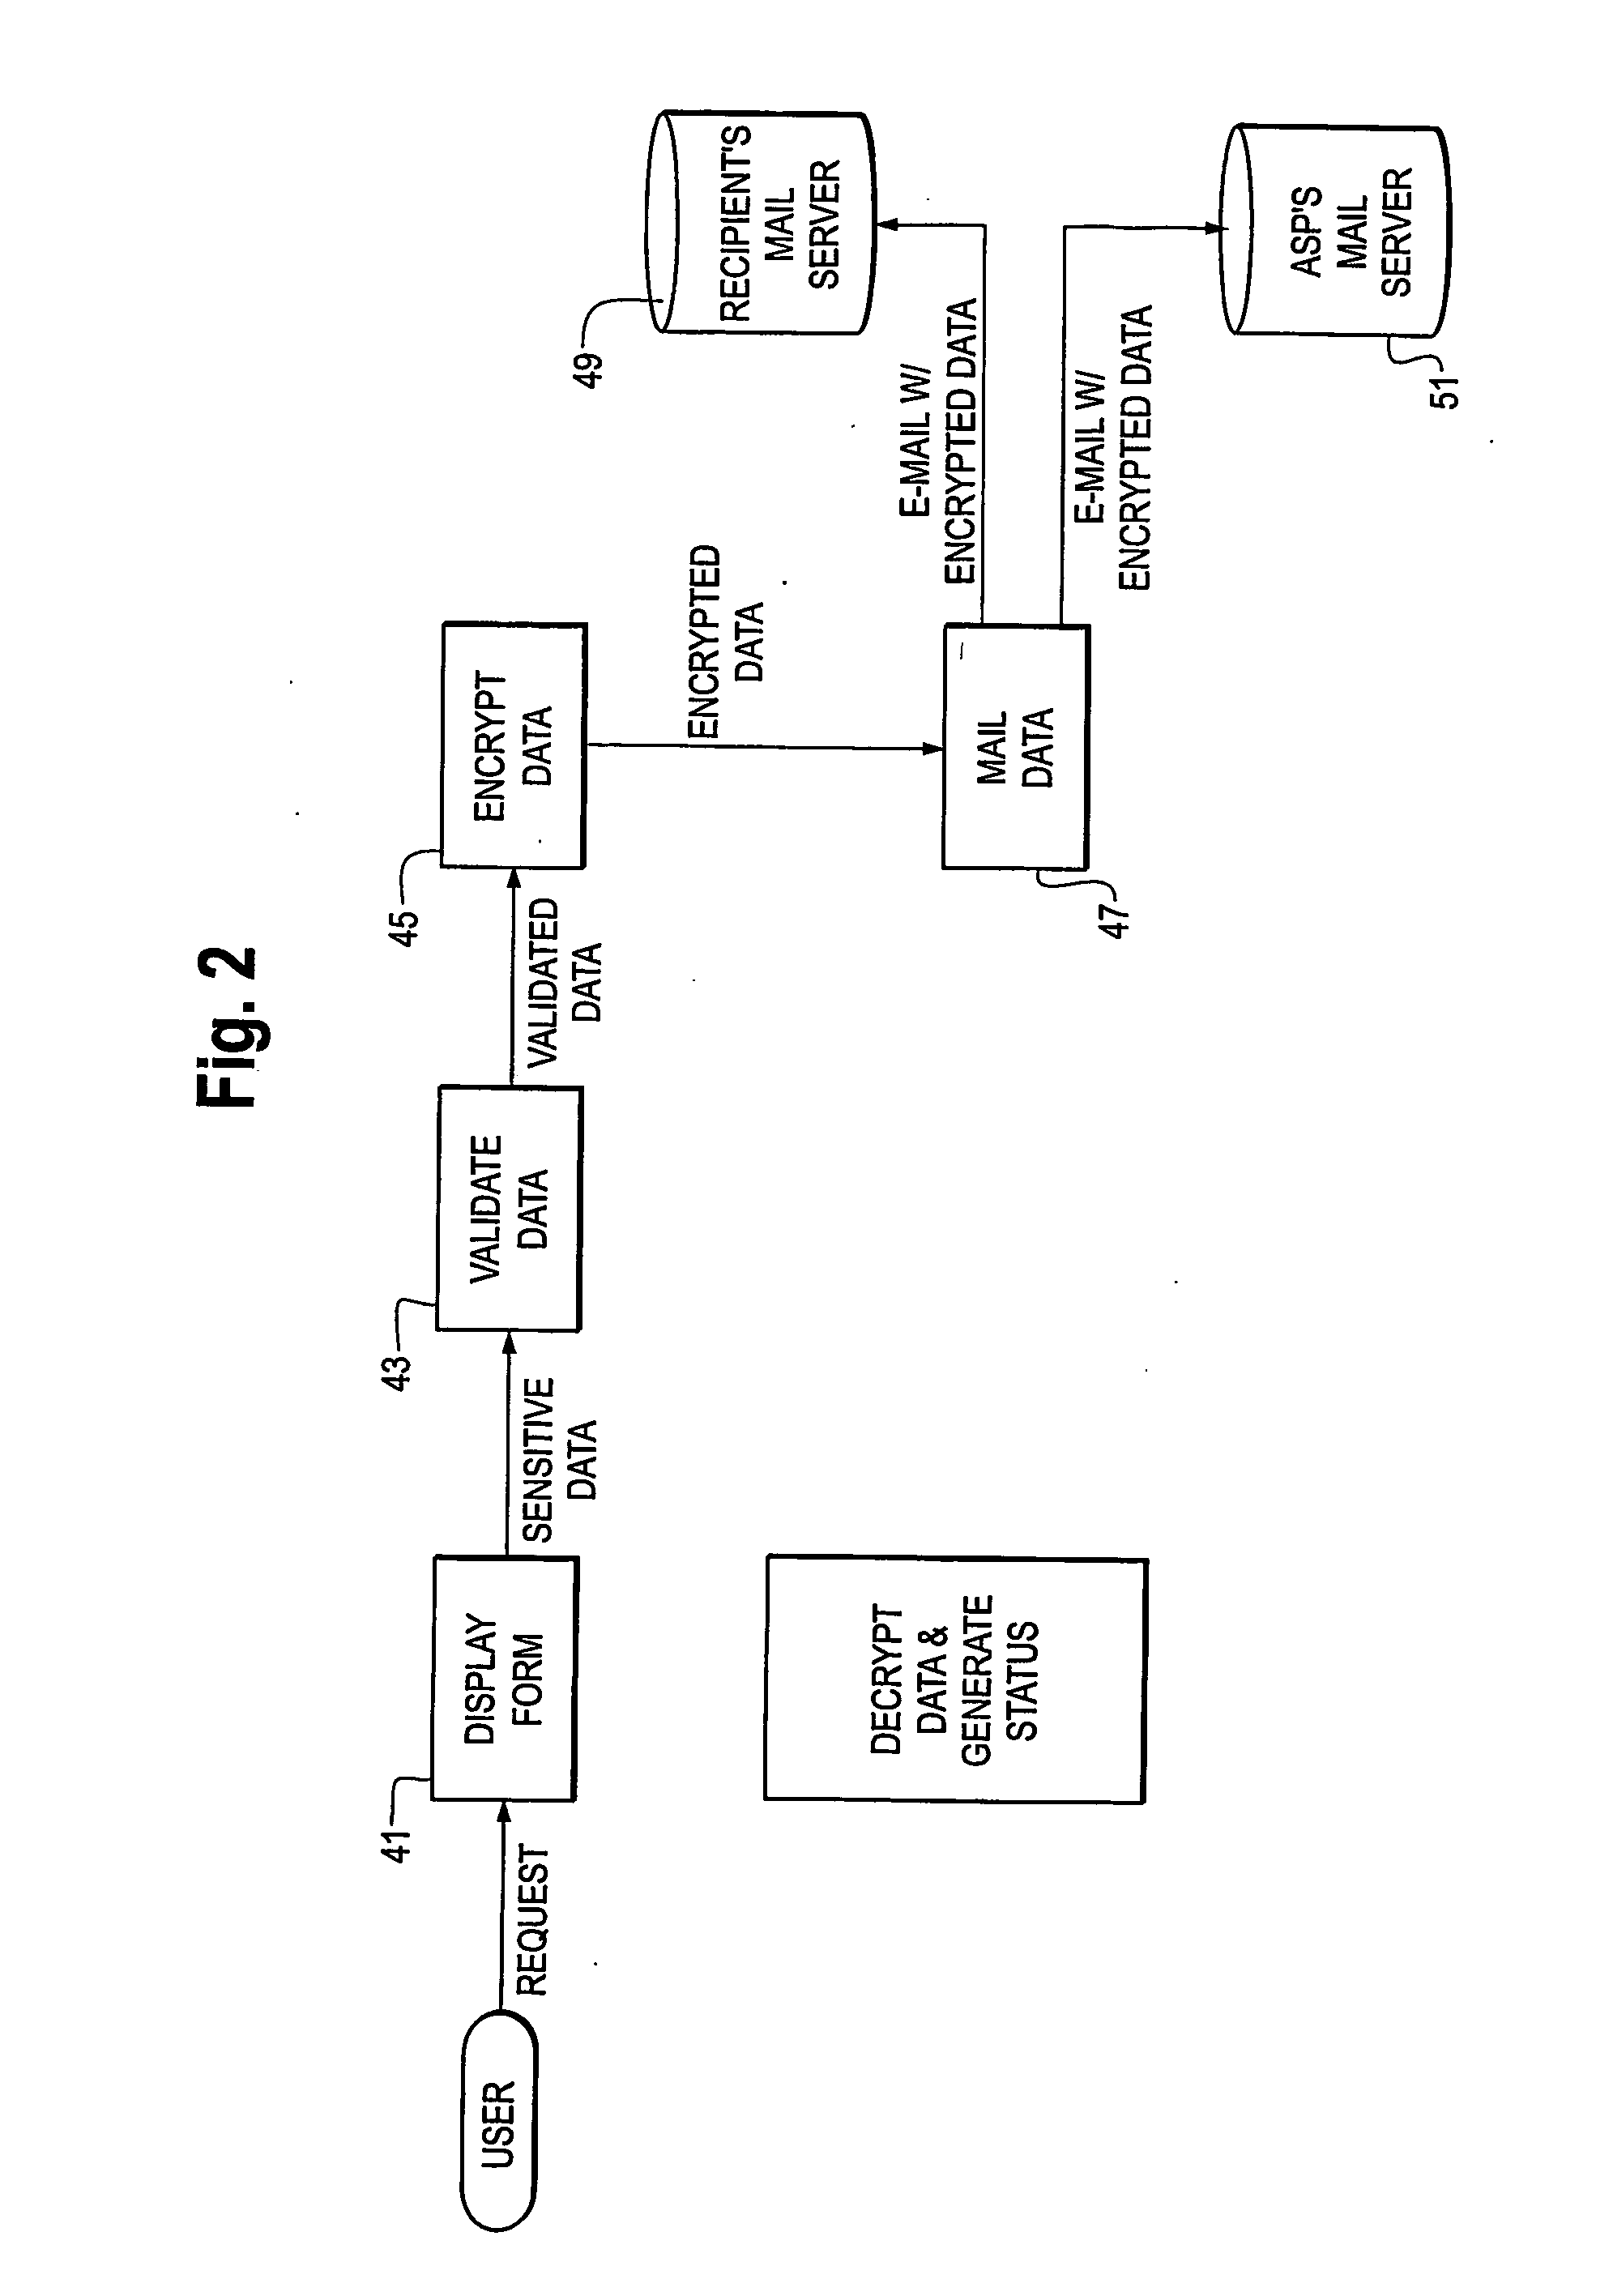 Method And System For Providing A Customized Network